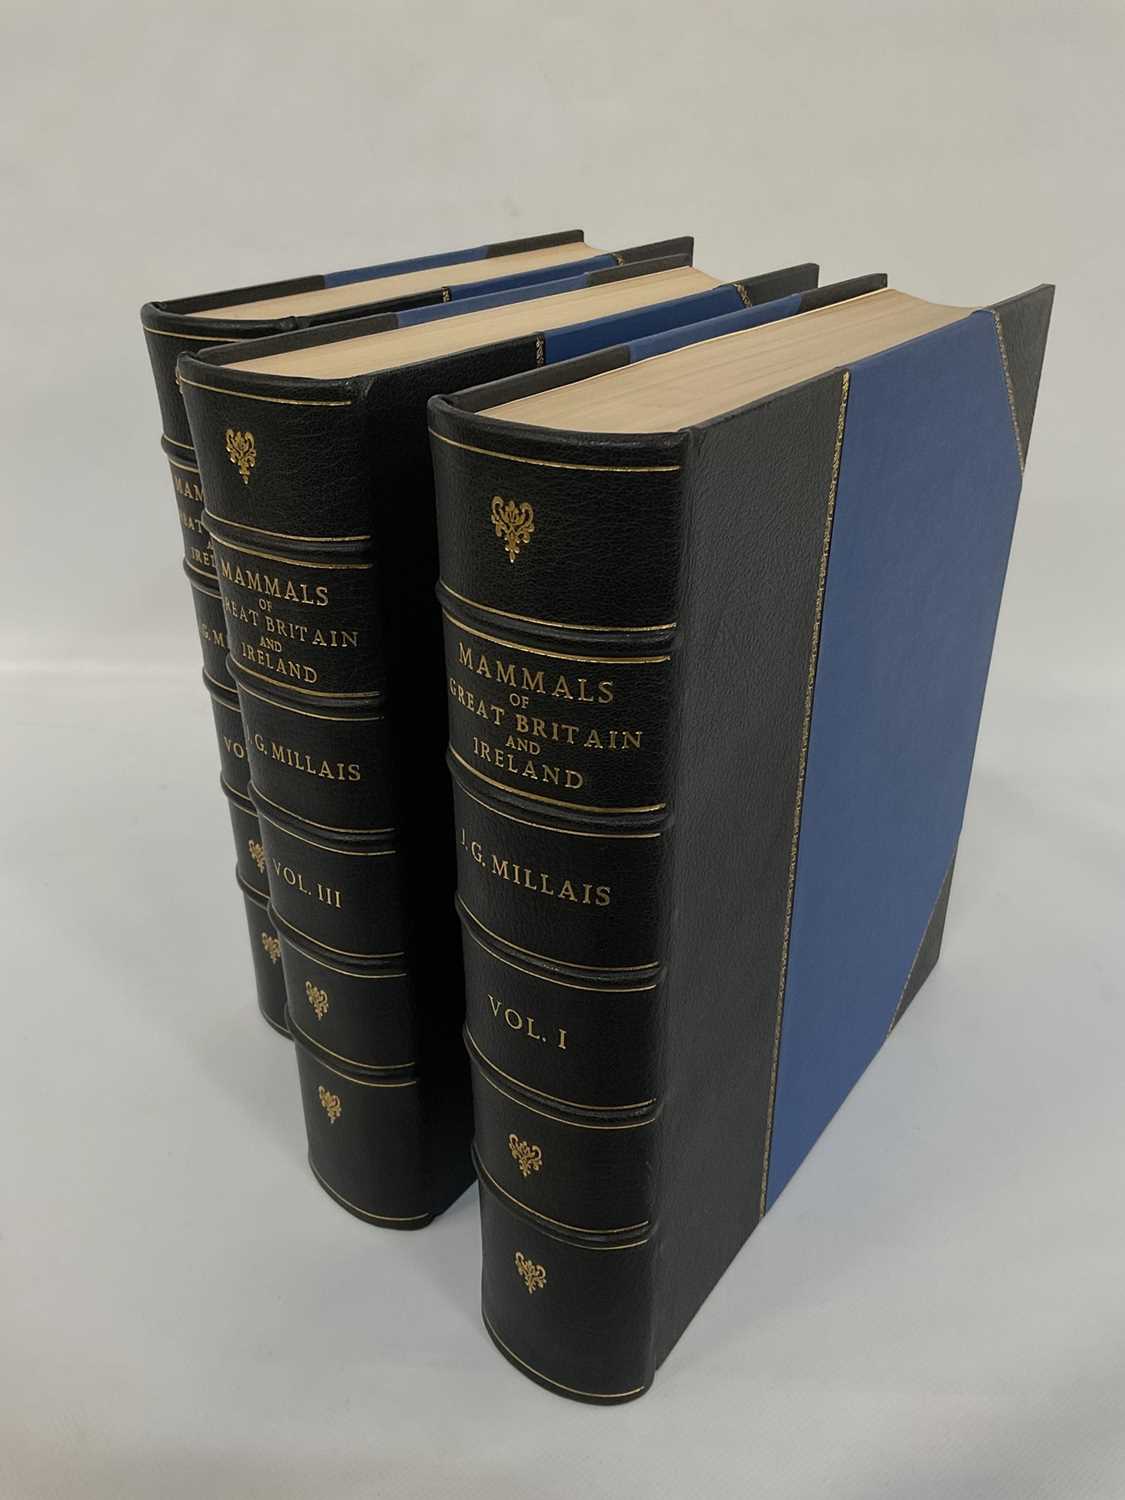 John Guille Millais - The Mammals of Great Britain and Ireland, 3 vols. 1905 first edition